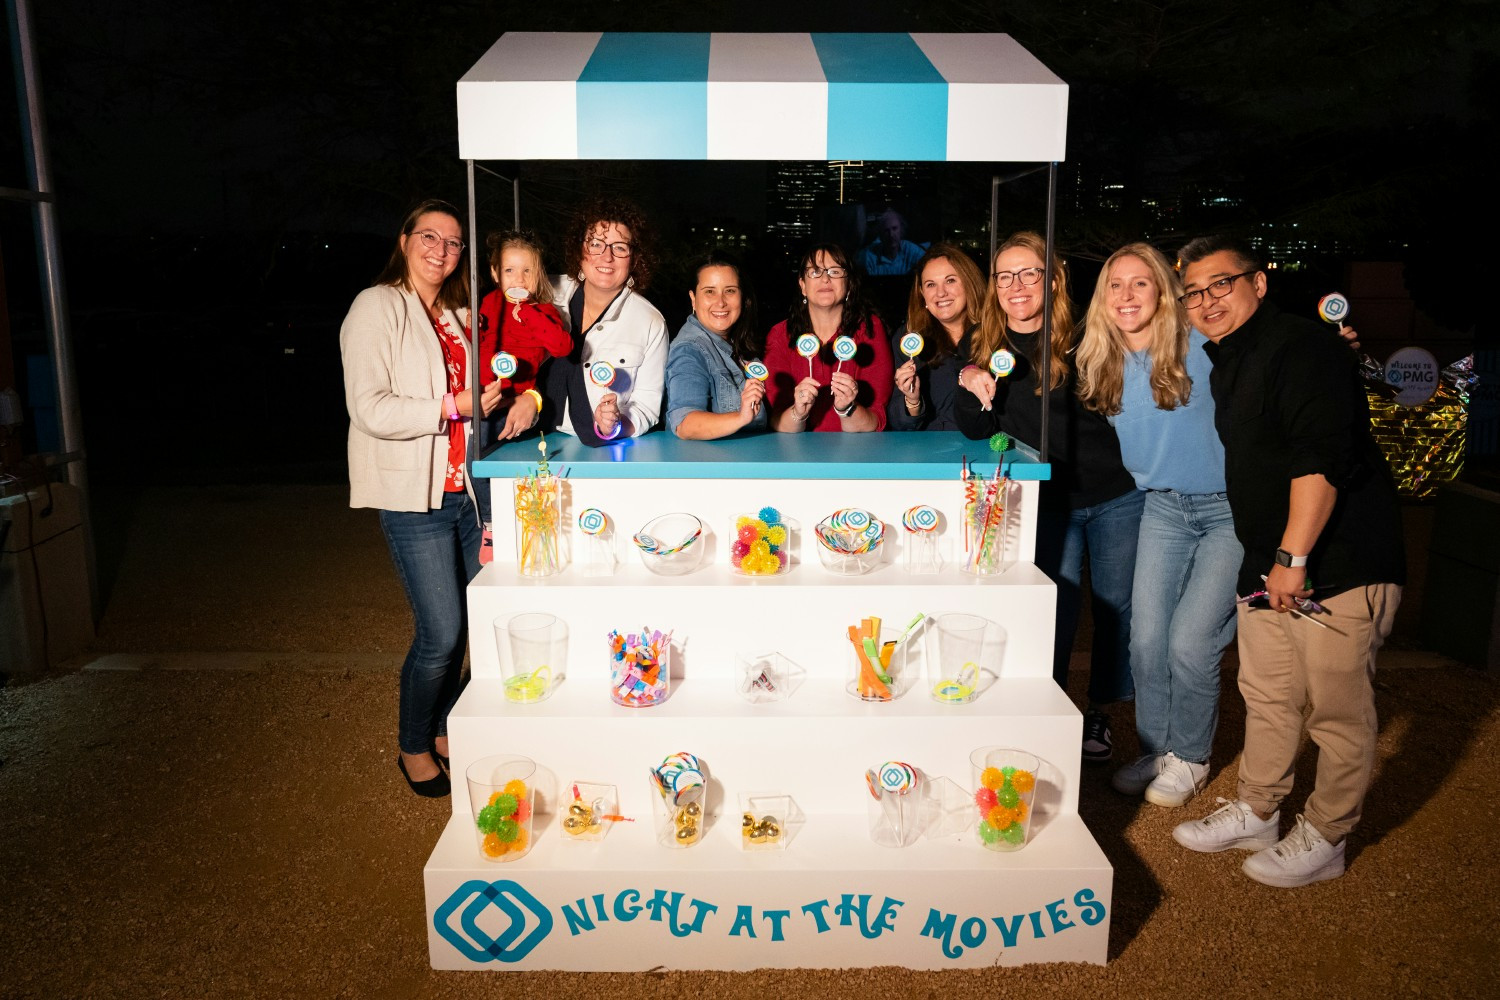 PMG hosts bonding events across its locations throughout the year, including our annual Night at the Movies.